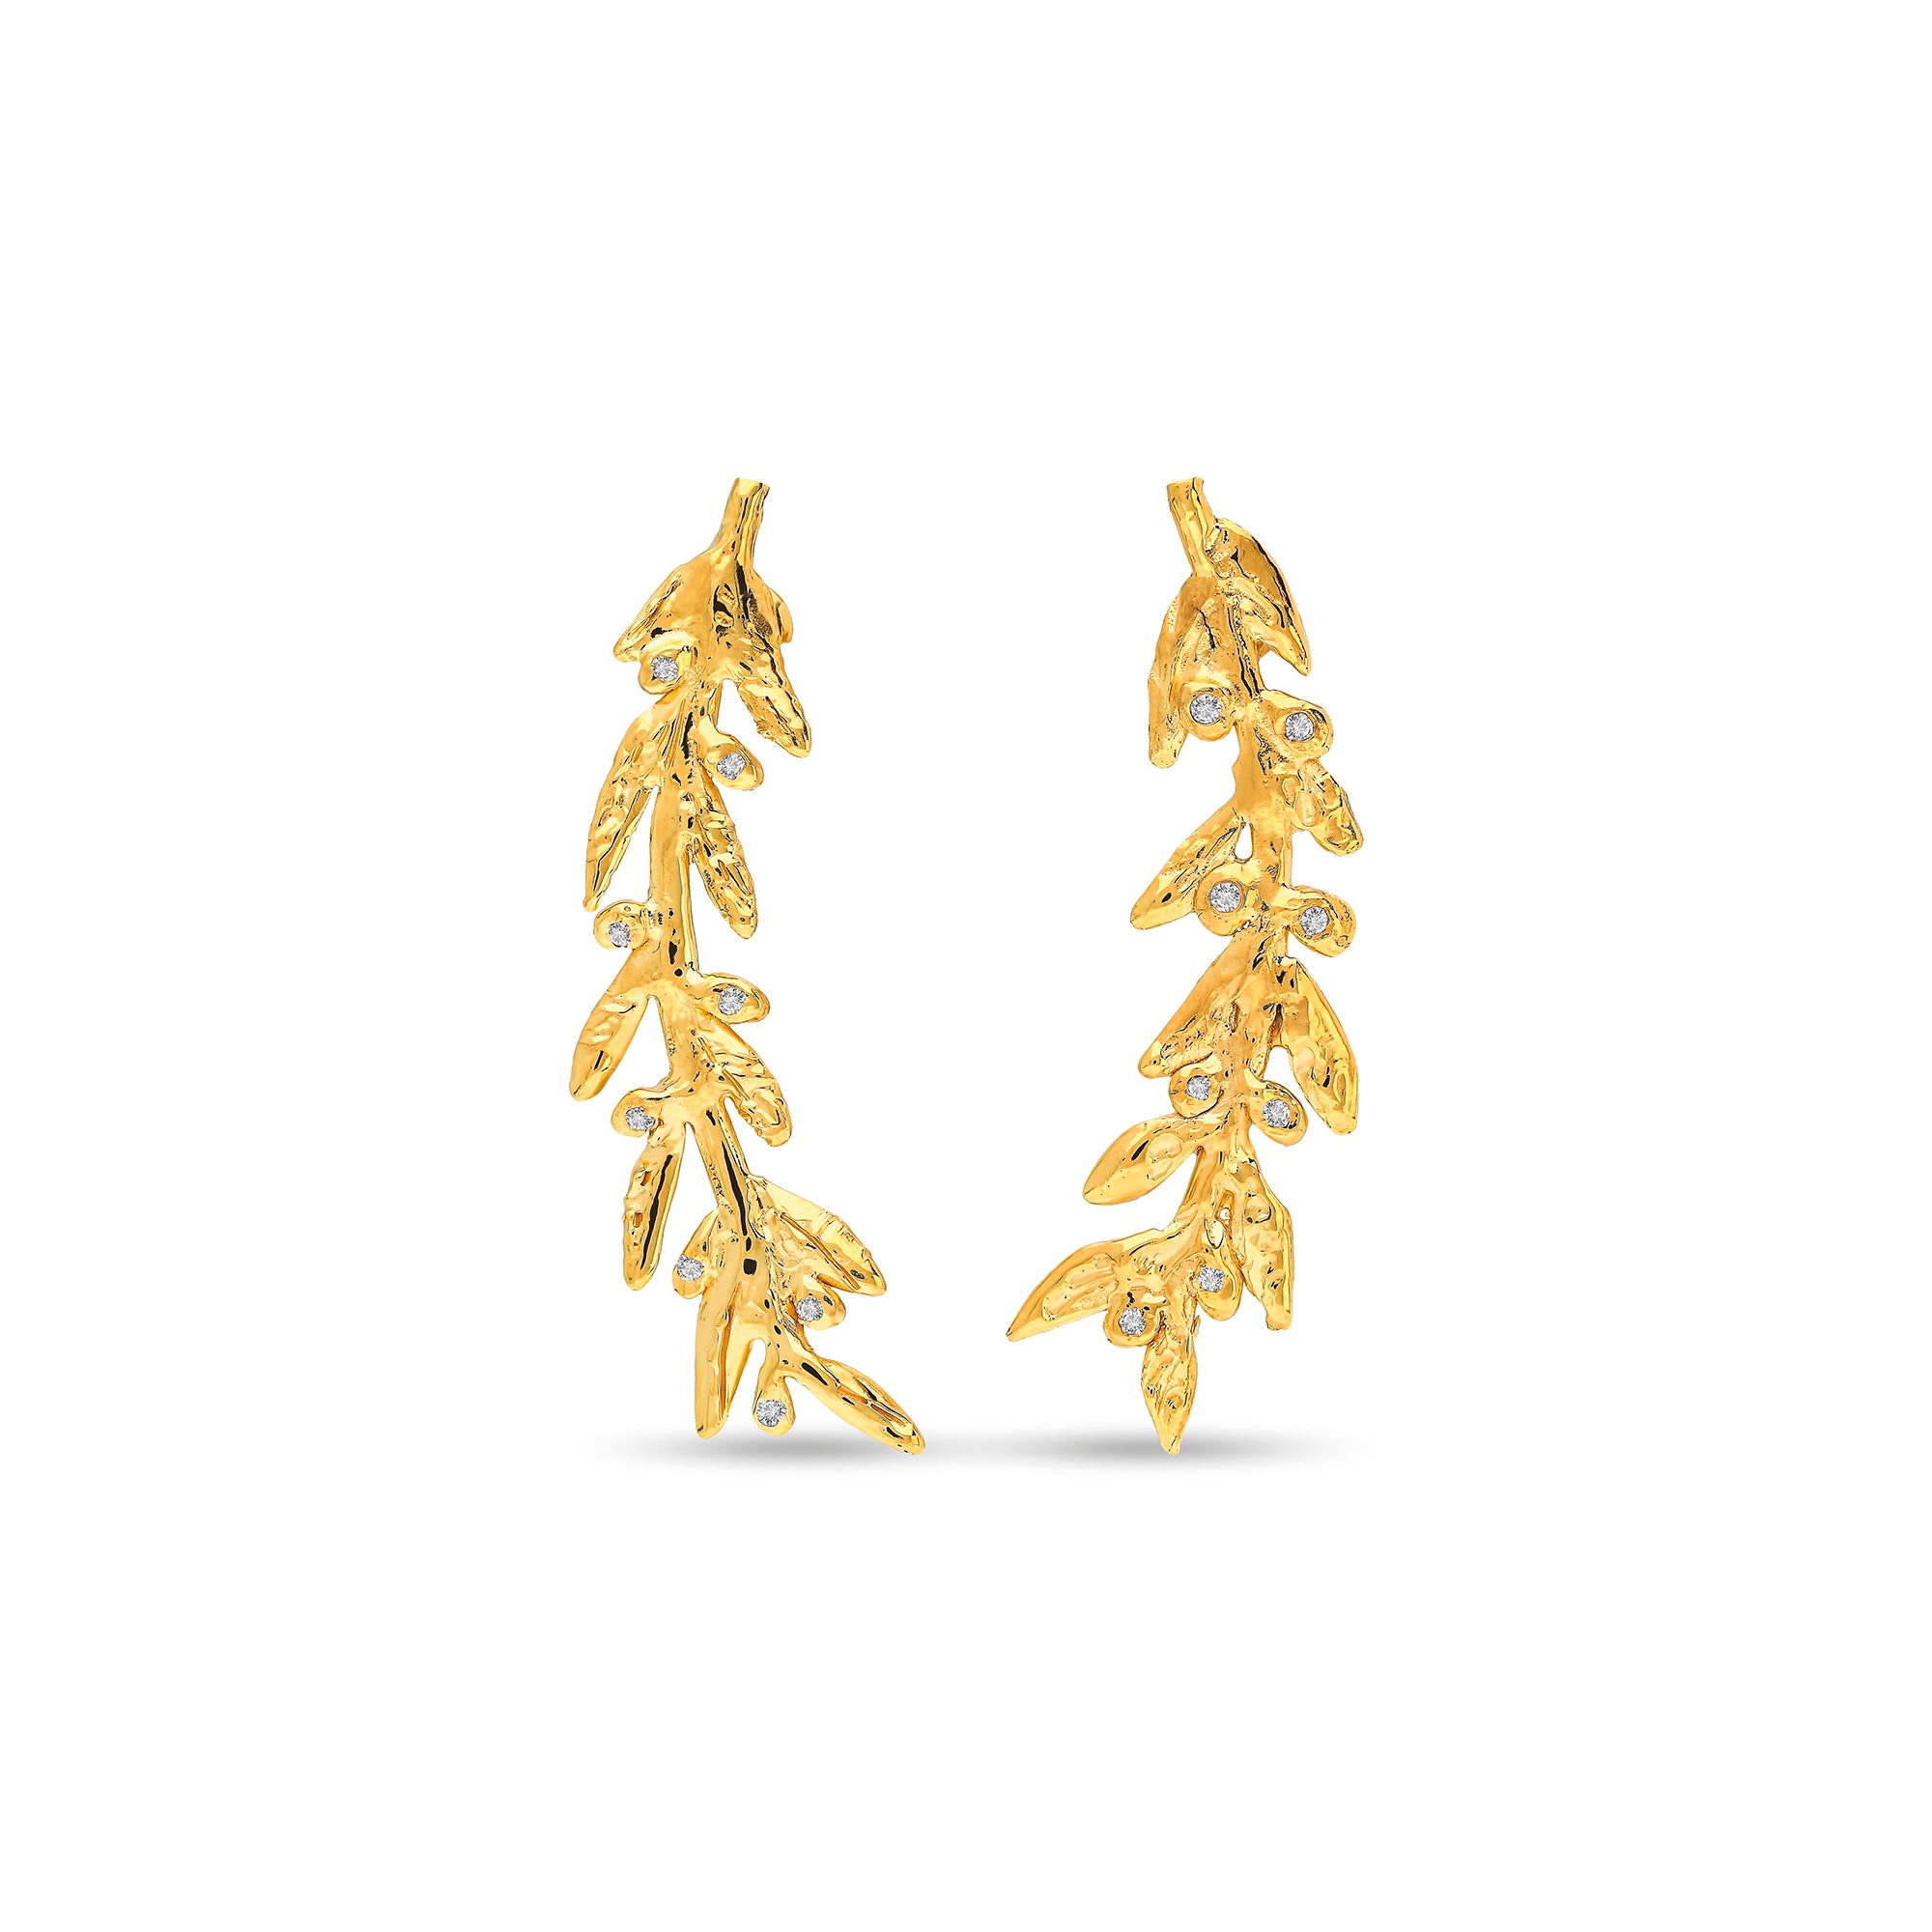 THE OLIVE BRANCH EARRINGS